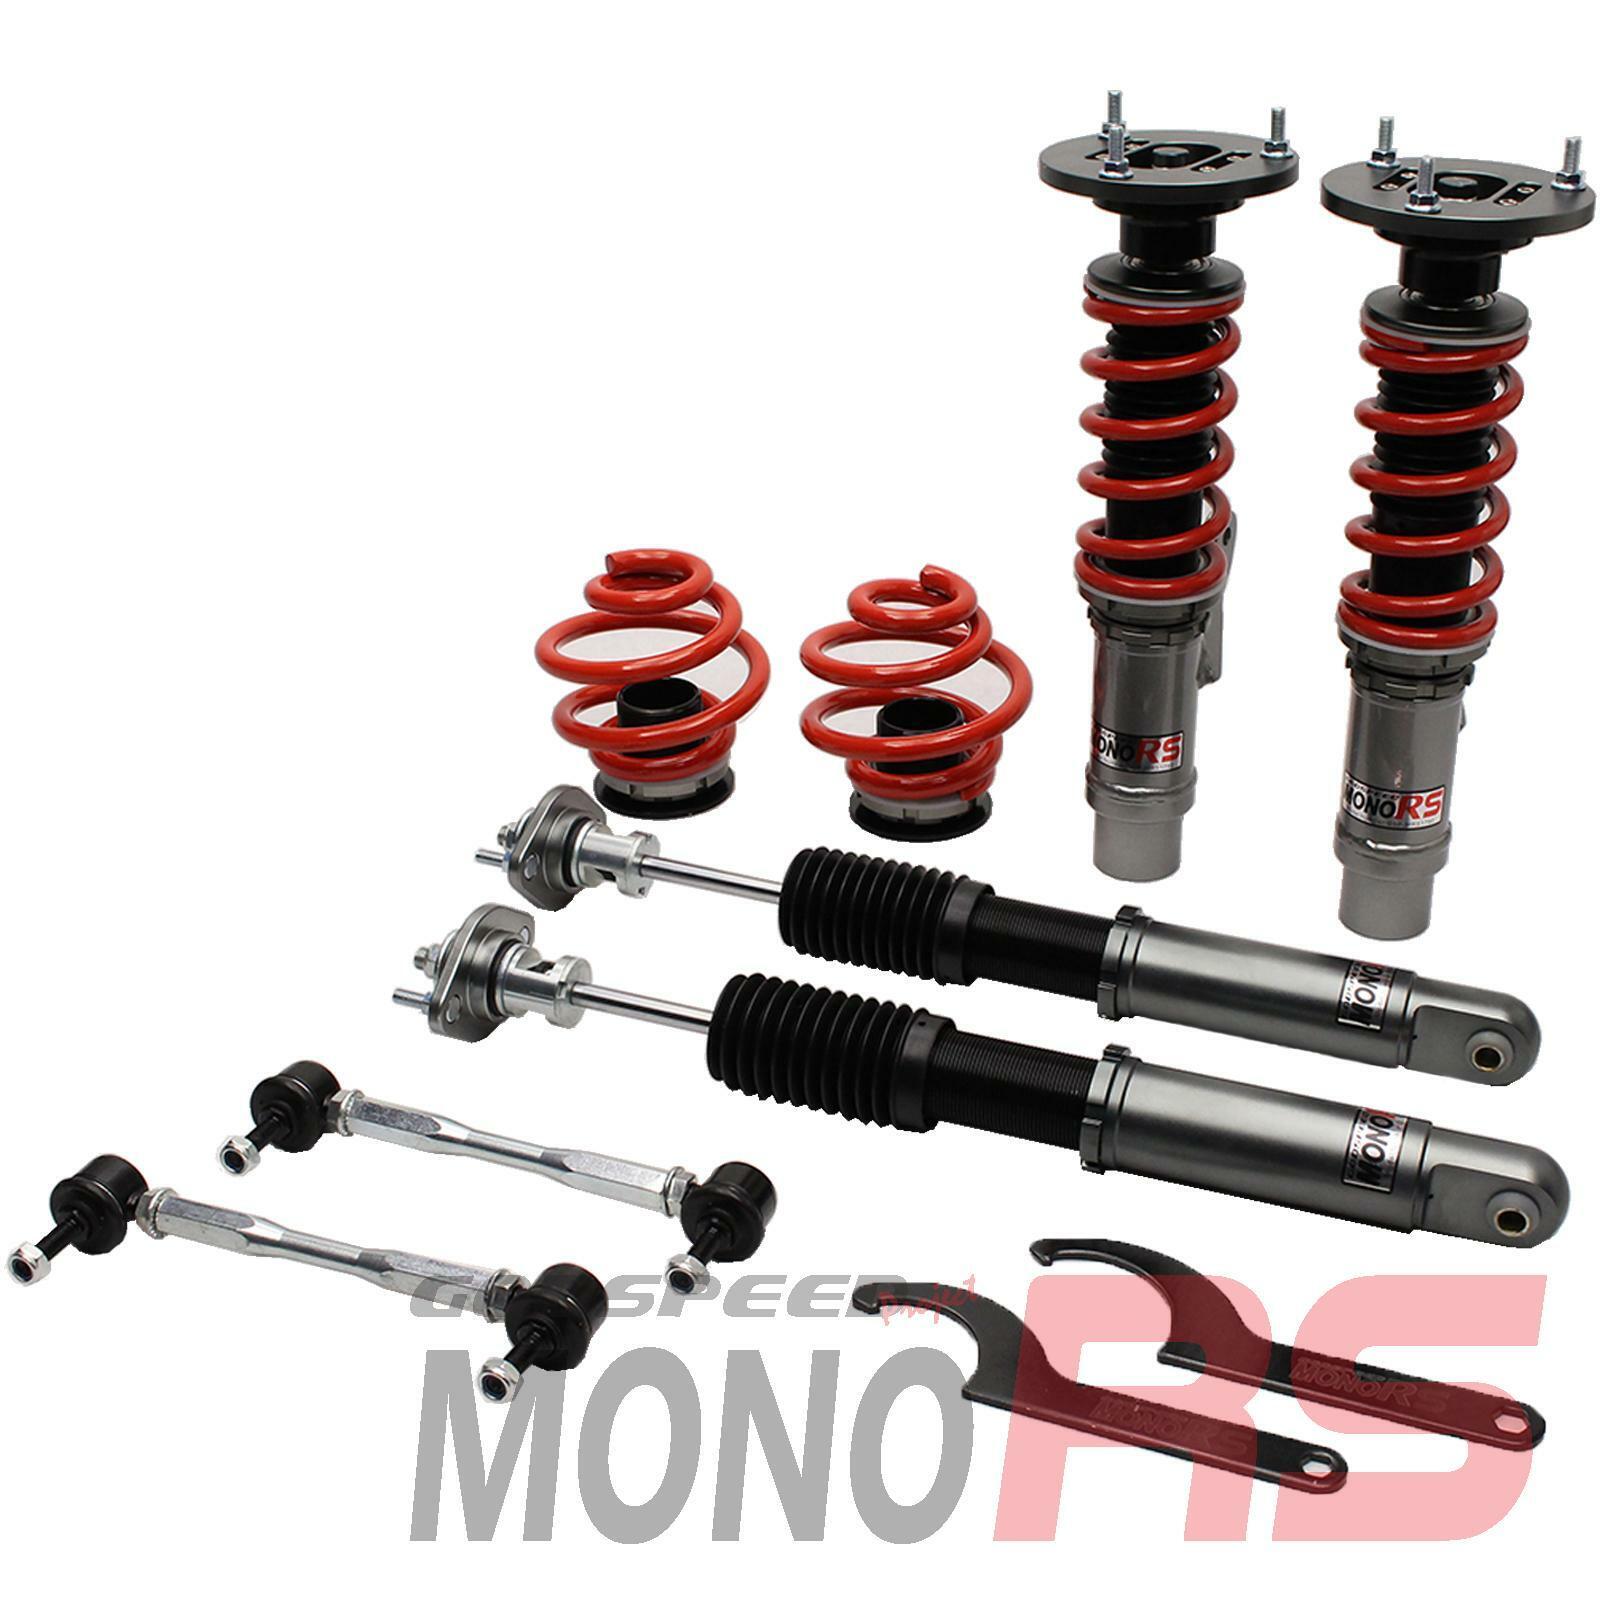 Godspeed(MRS1780) MonoRS Coilovers for BMW Z4(E85) 02-08, Fully Adjustable